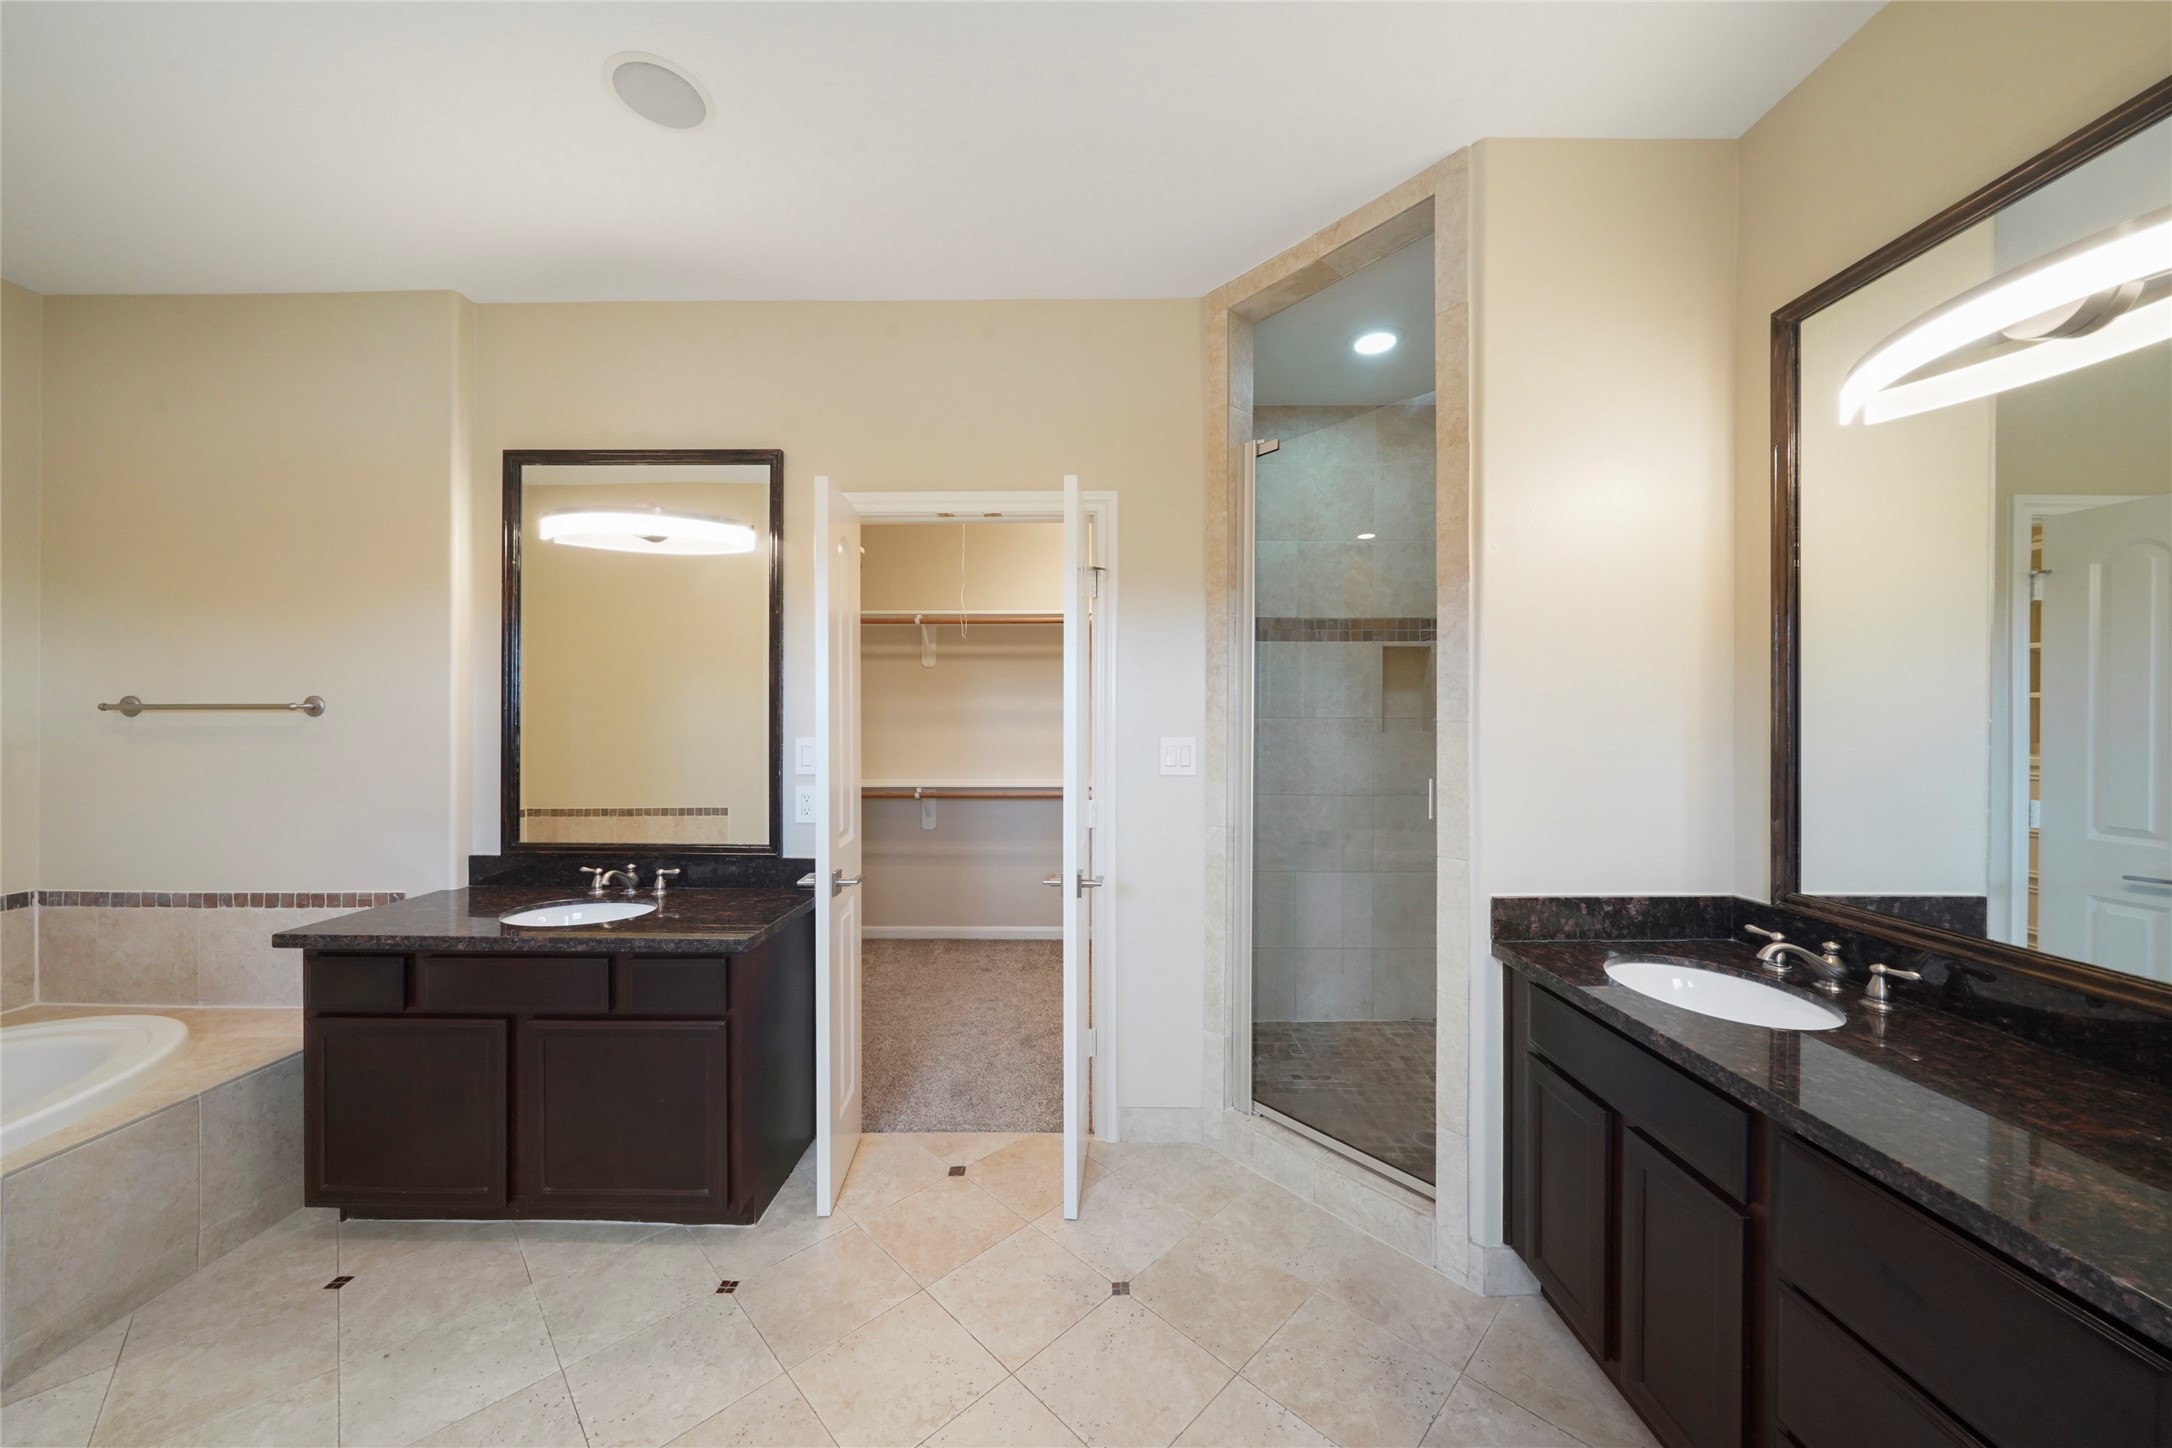 The primary bathroom also offers separate sinks, and jetted tub.